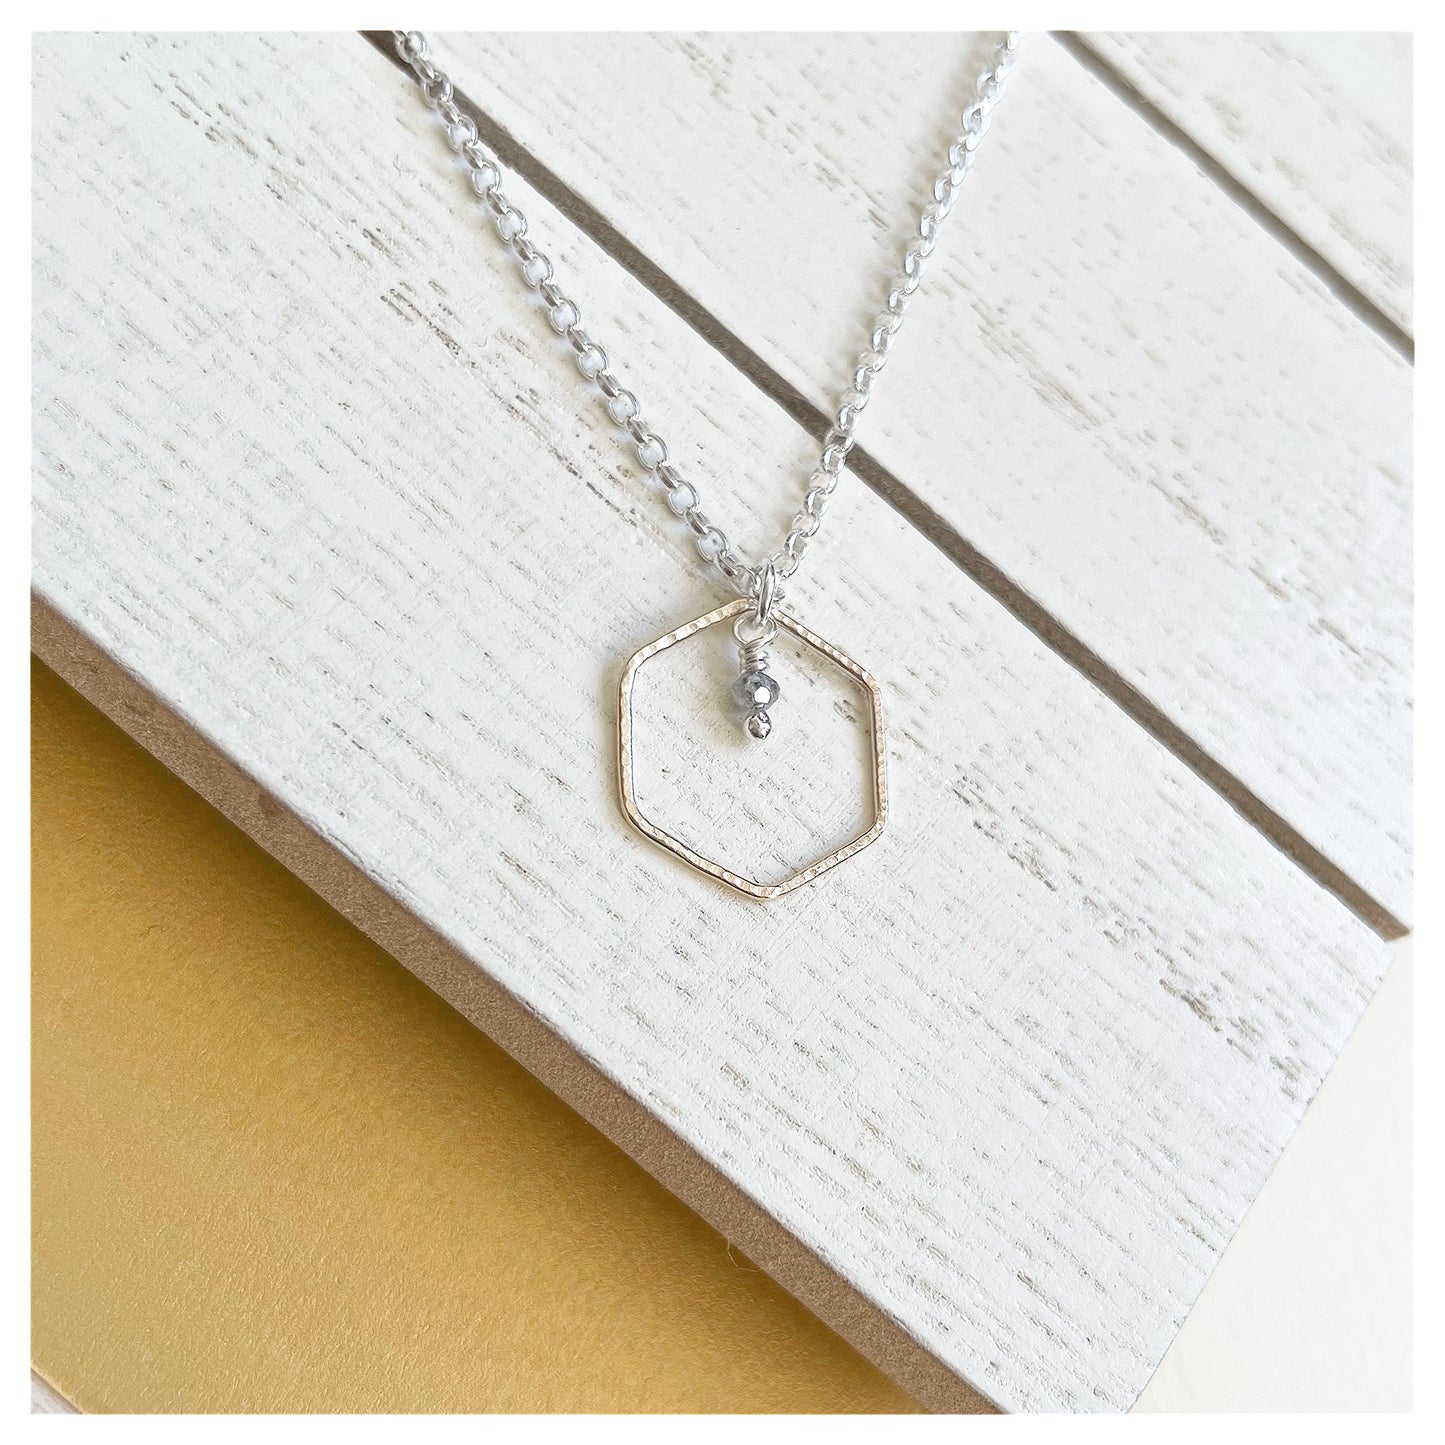 Mini 9ct Yellow Gold Hammered Hexagon, Sterling Silver and  Dark Grey Diamond Bead Necklace.